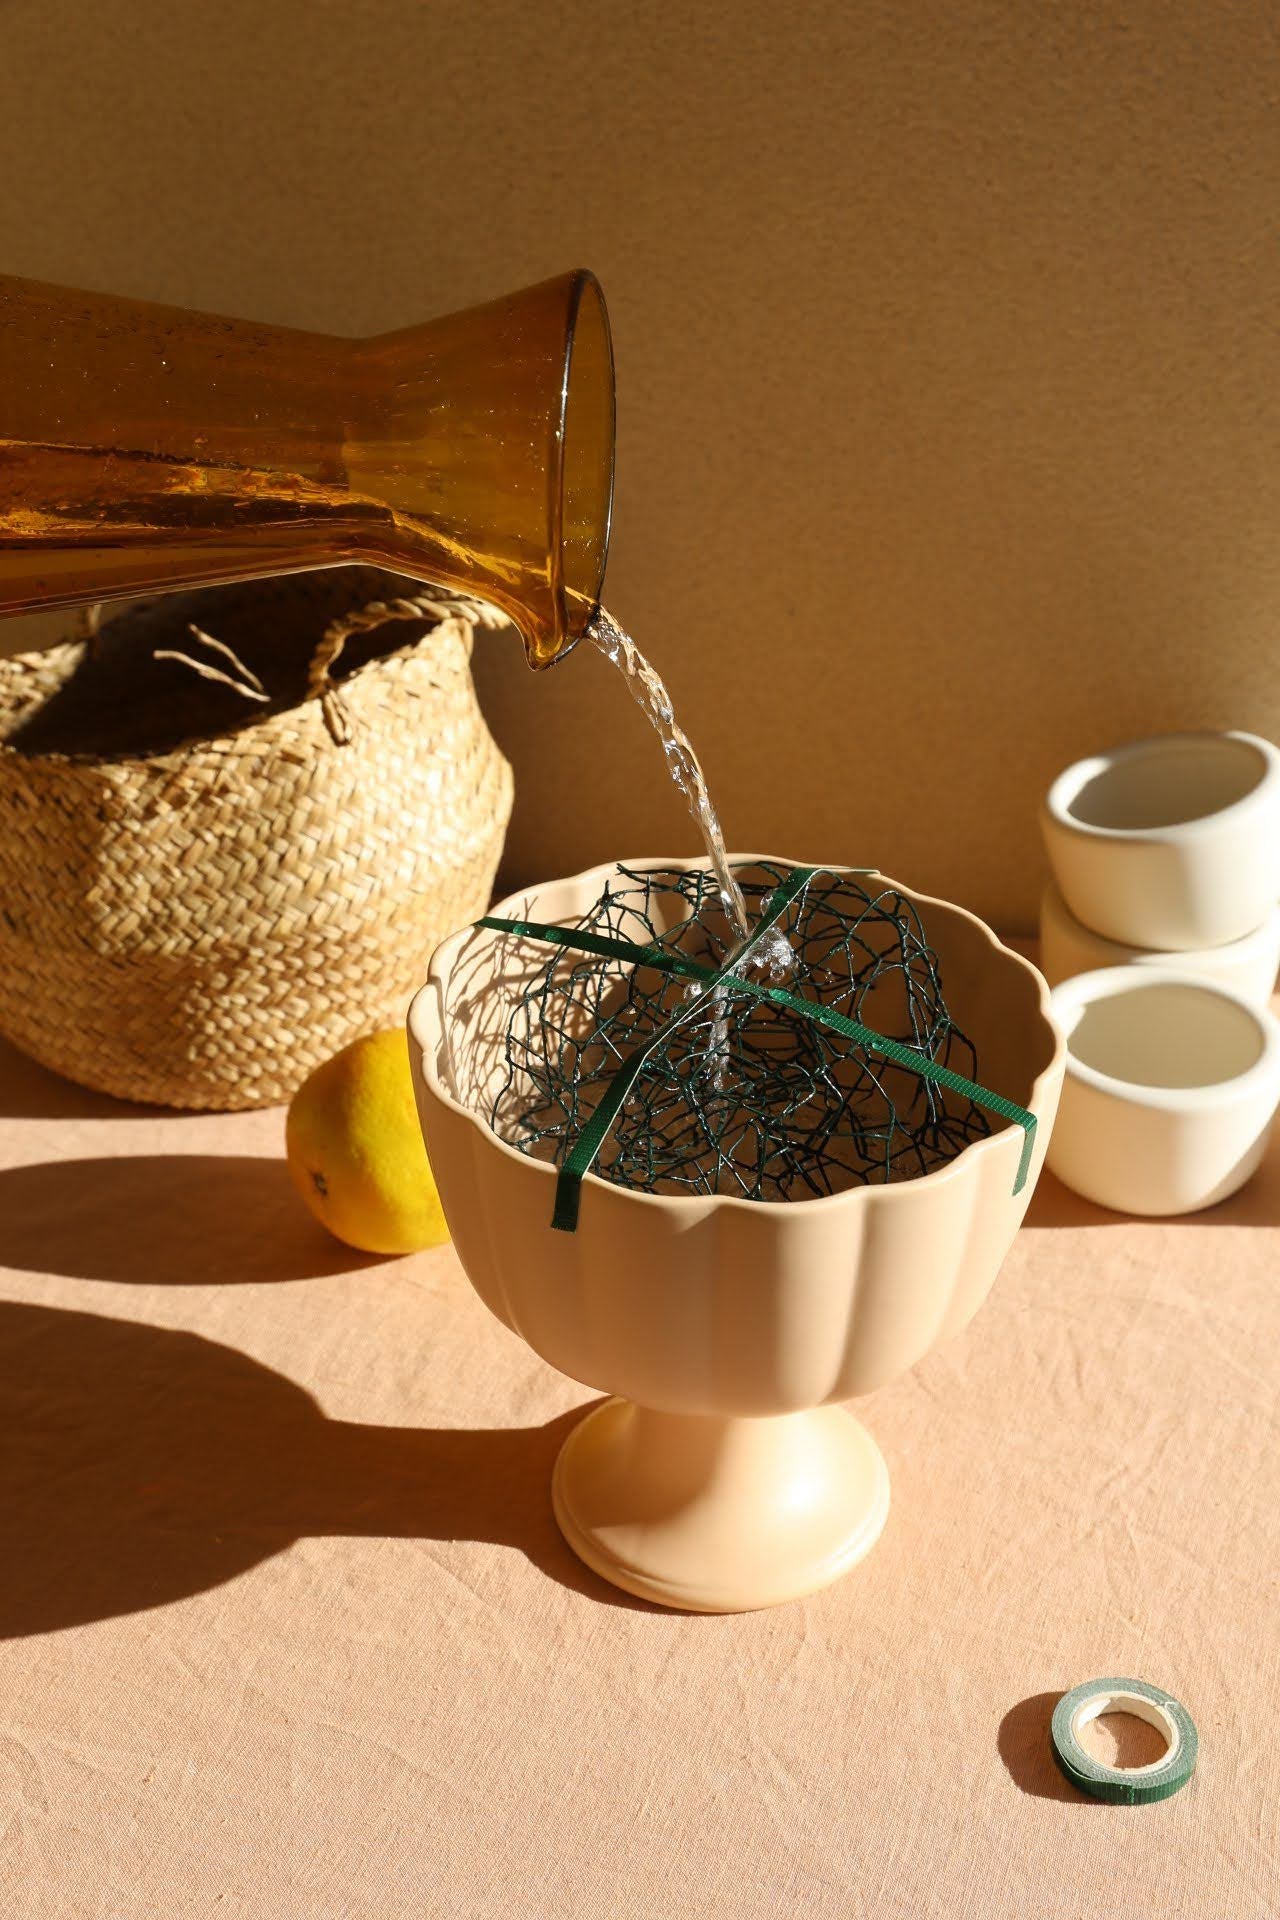 Light brown scallop edge footed bowl with chicken wire inside being filled with water from an amber glass jug